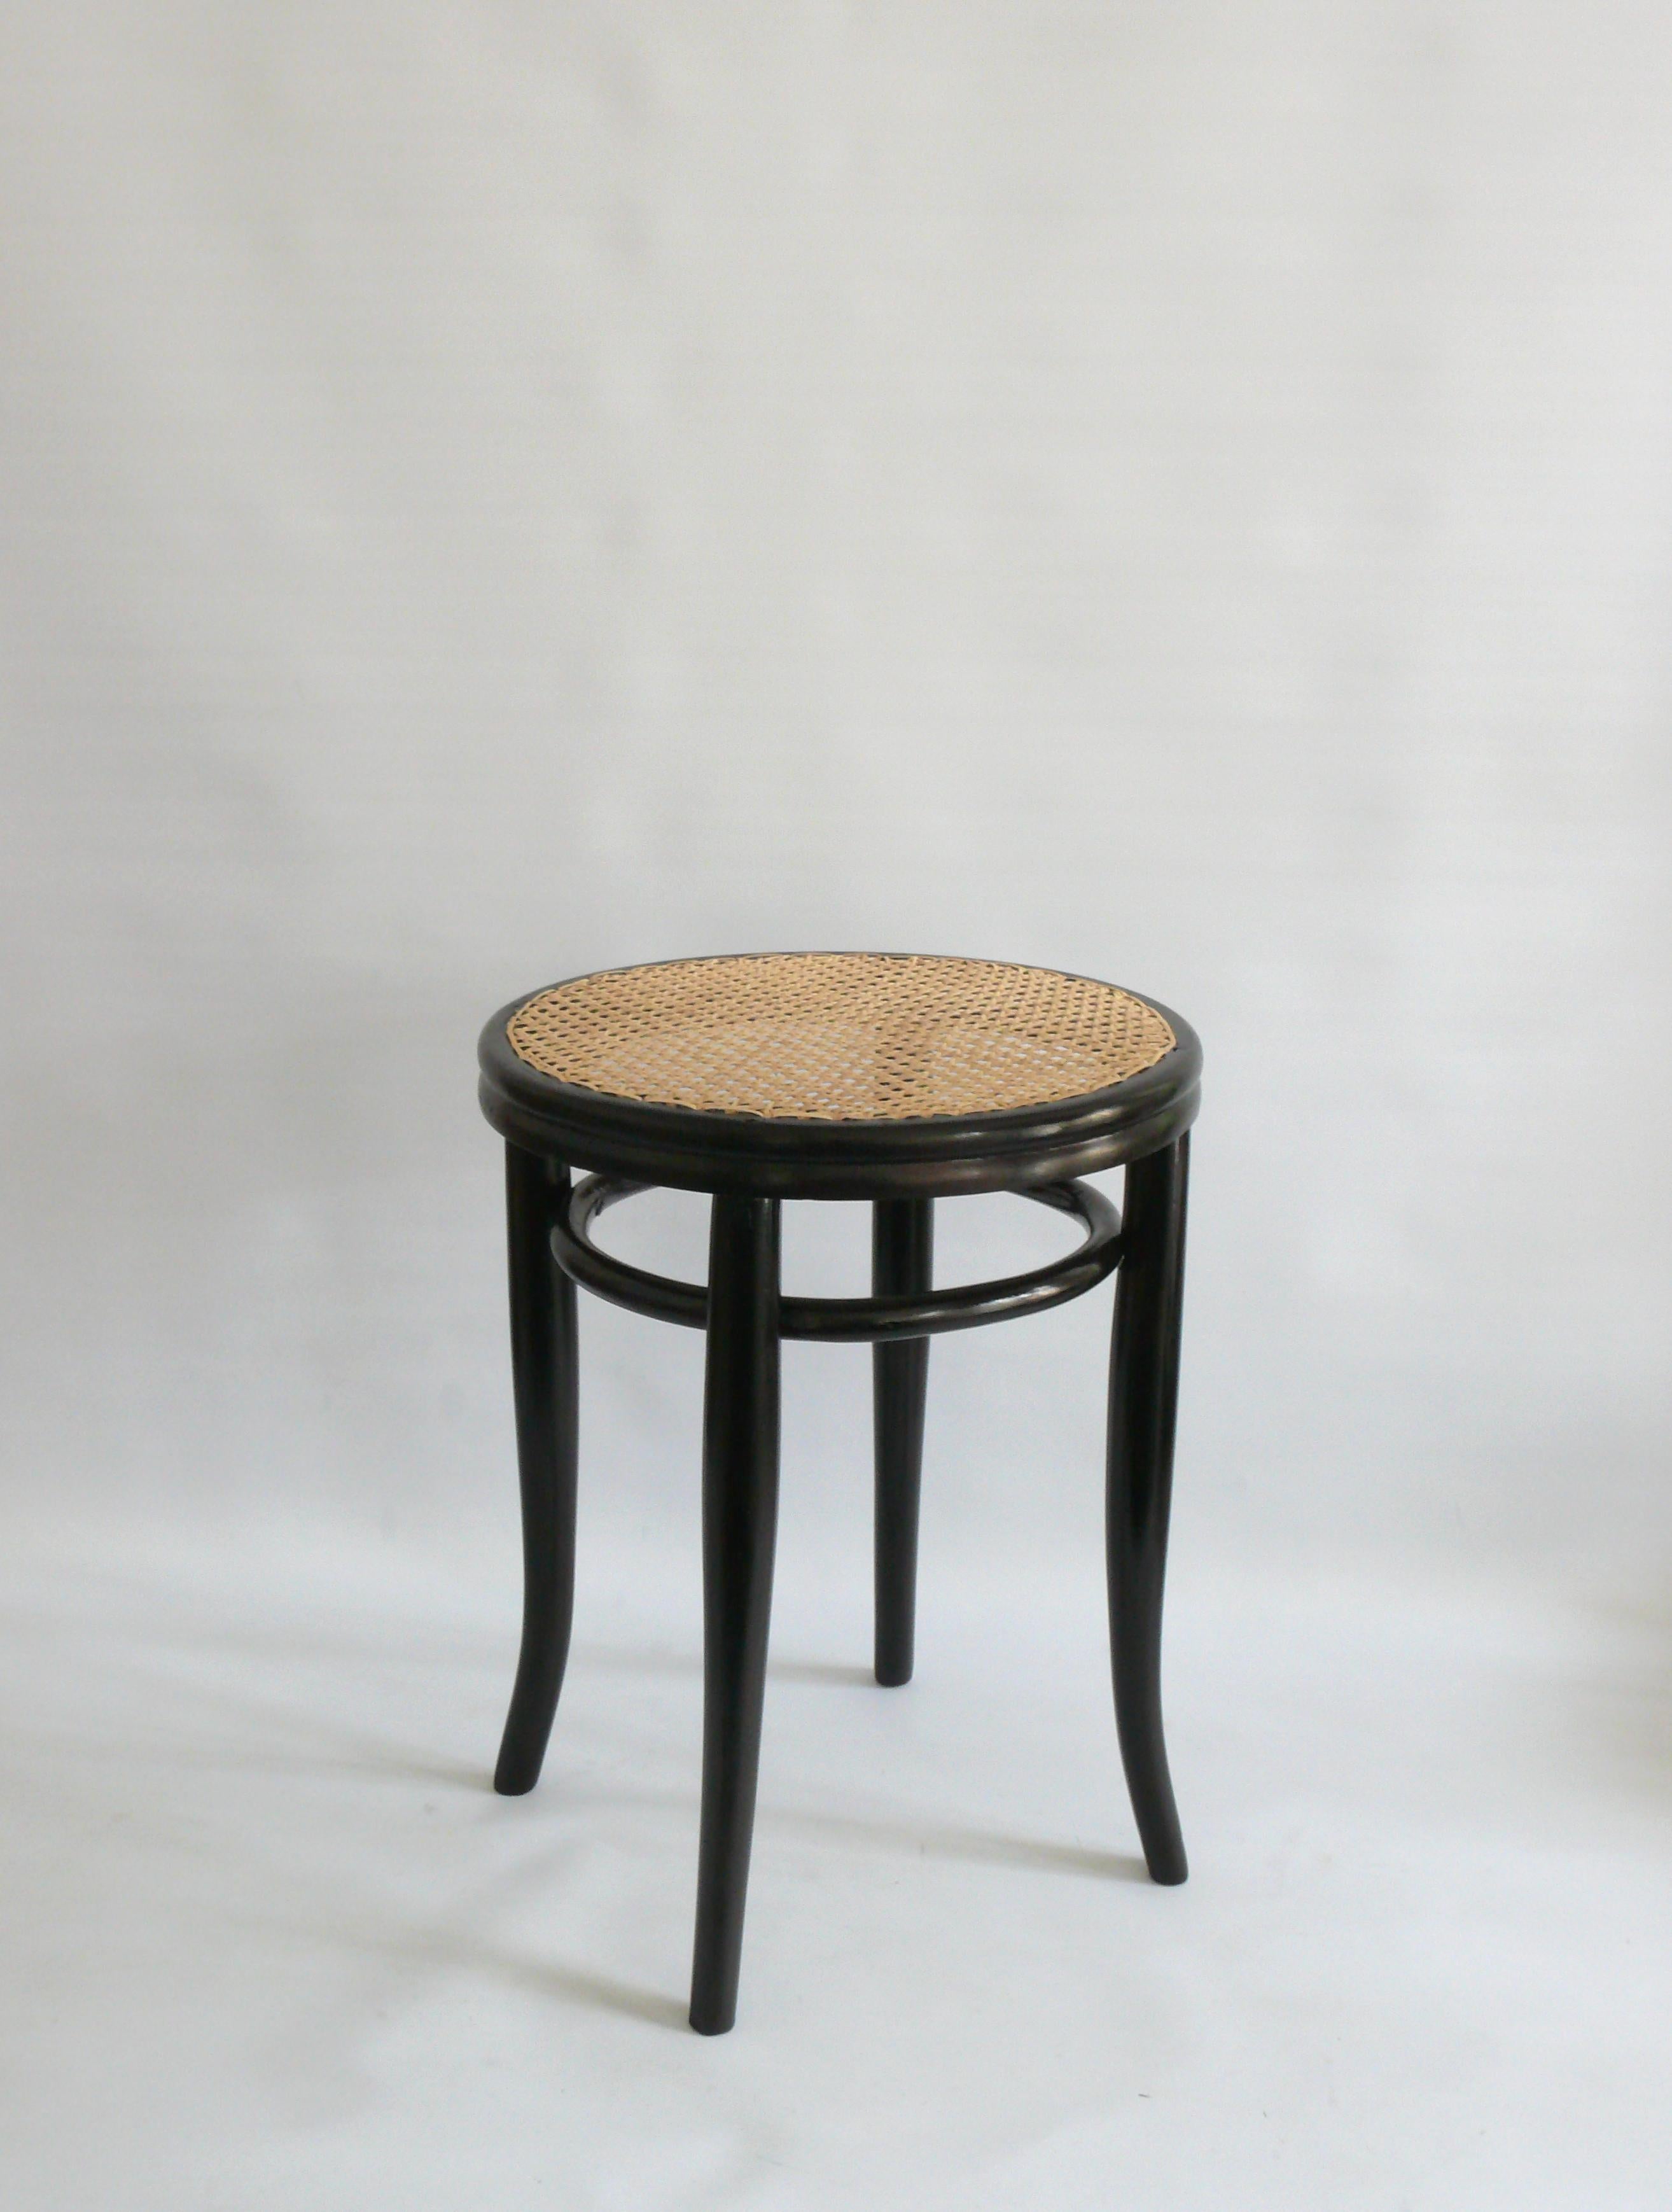 Original Kohn bentwood stool with Viennese weave from the end of the 19th or beginning of the 20th century from the J.&J company. Kohn, Austria. The stool is made of bent beech wood and has a second bentwood ring below the seat for stability.